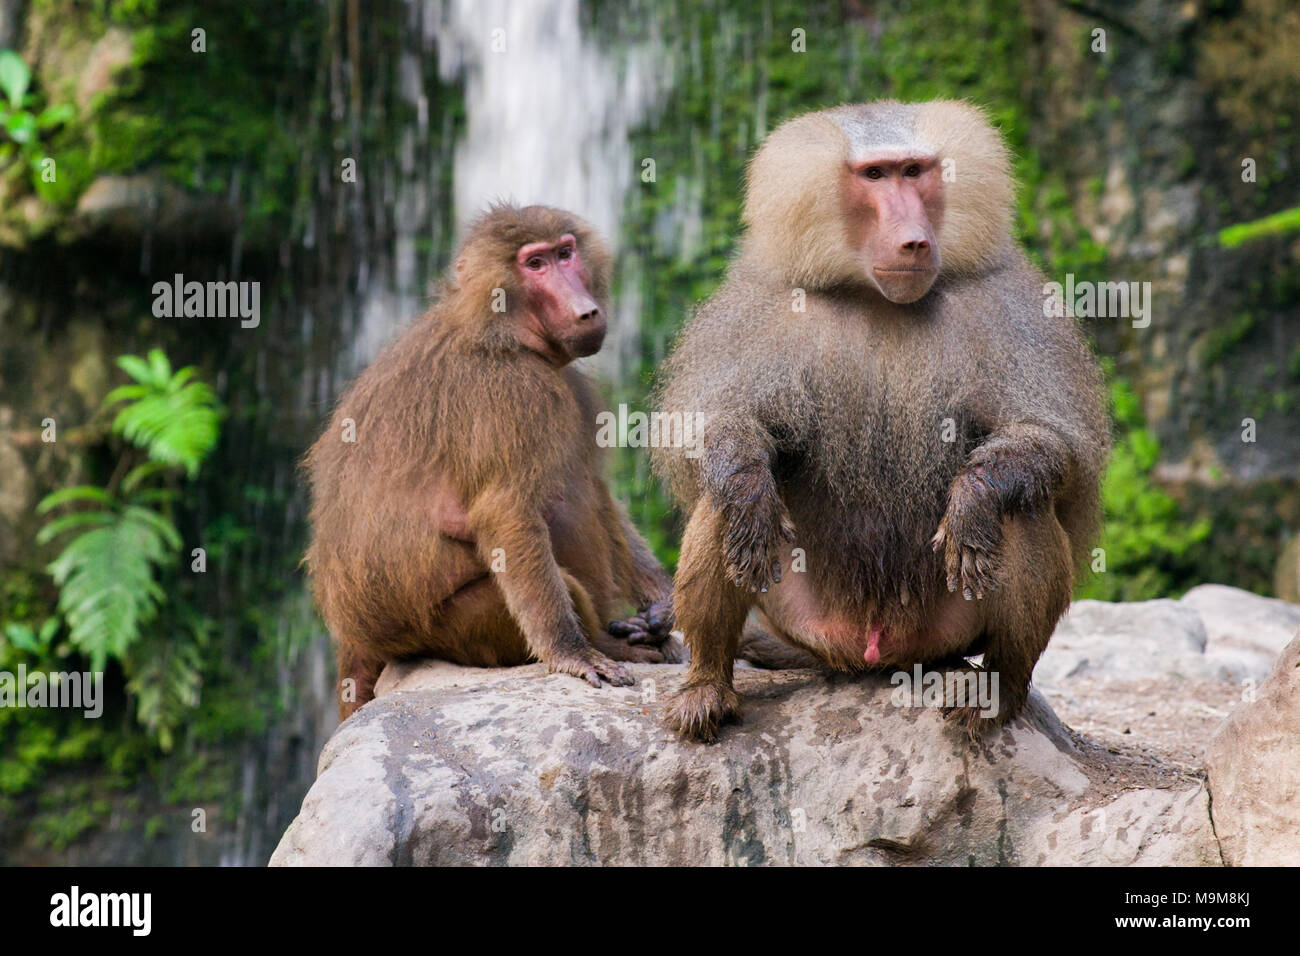 The hamadryas baboon sits on a rocks in the jungle Stock Photo